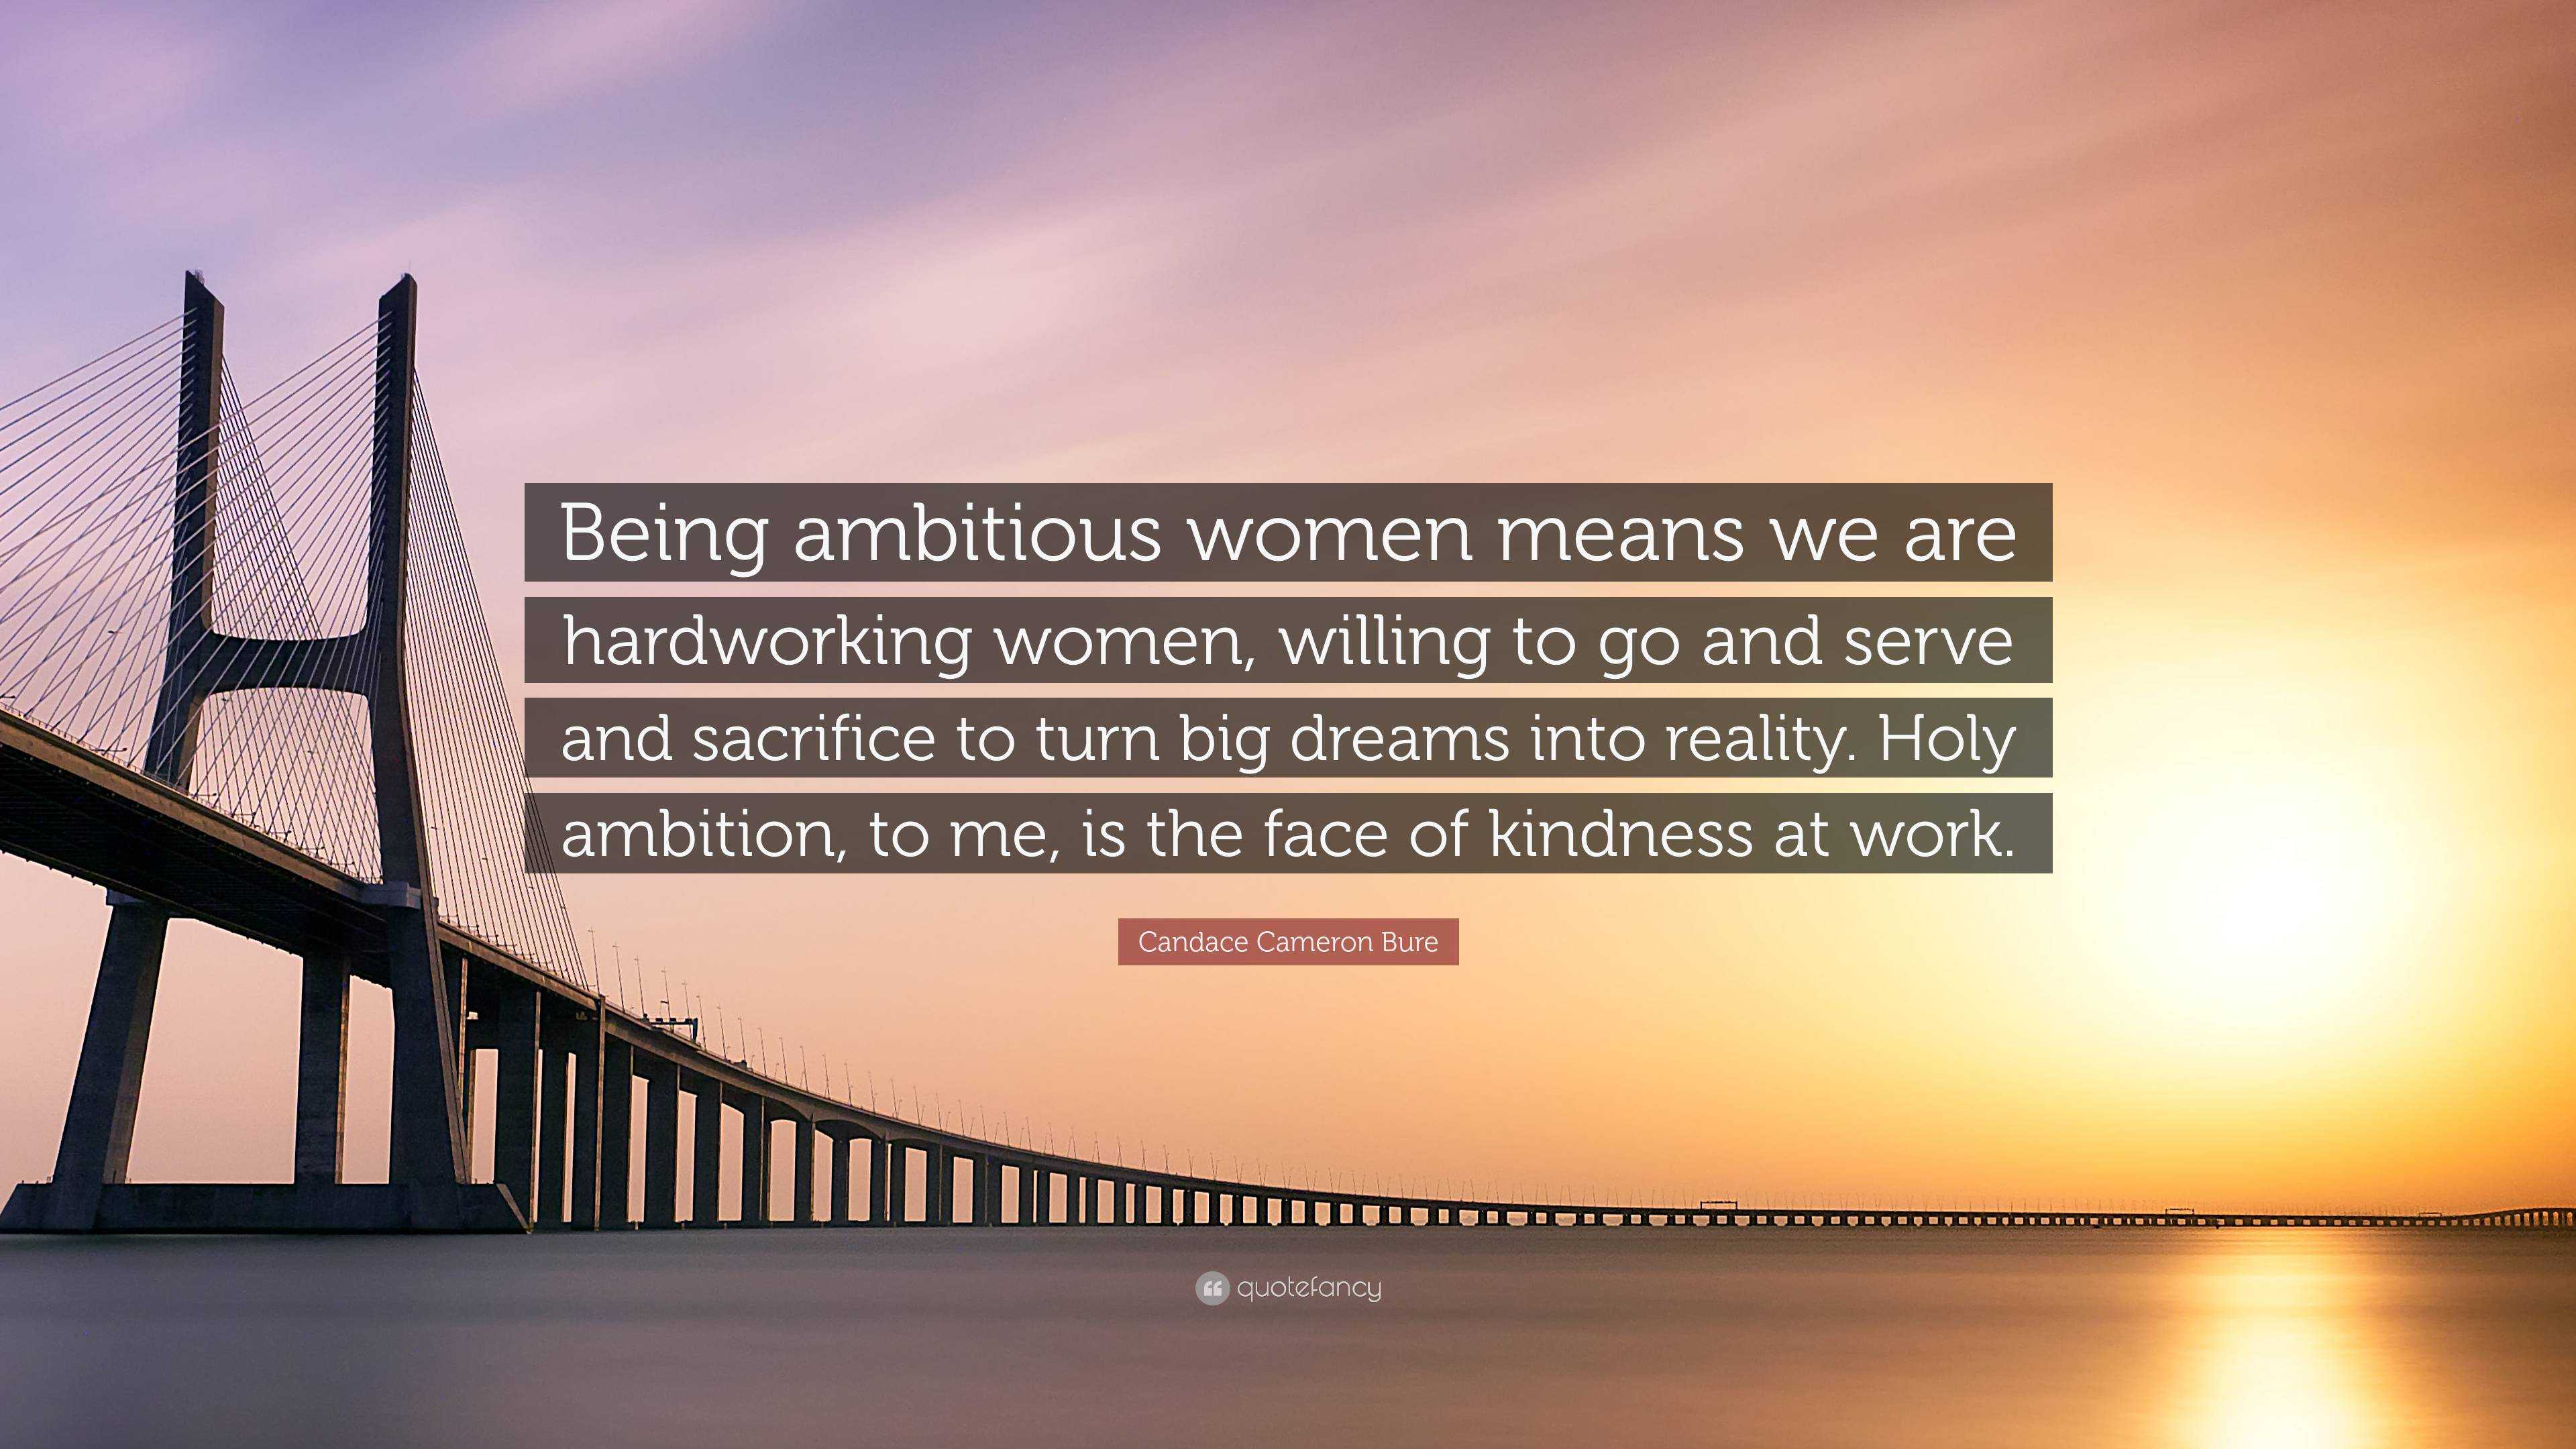 ambitious quotes for women